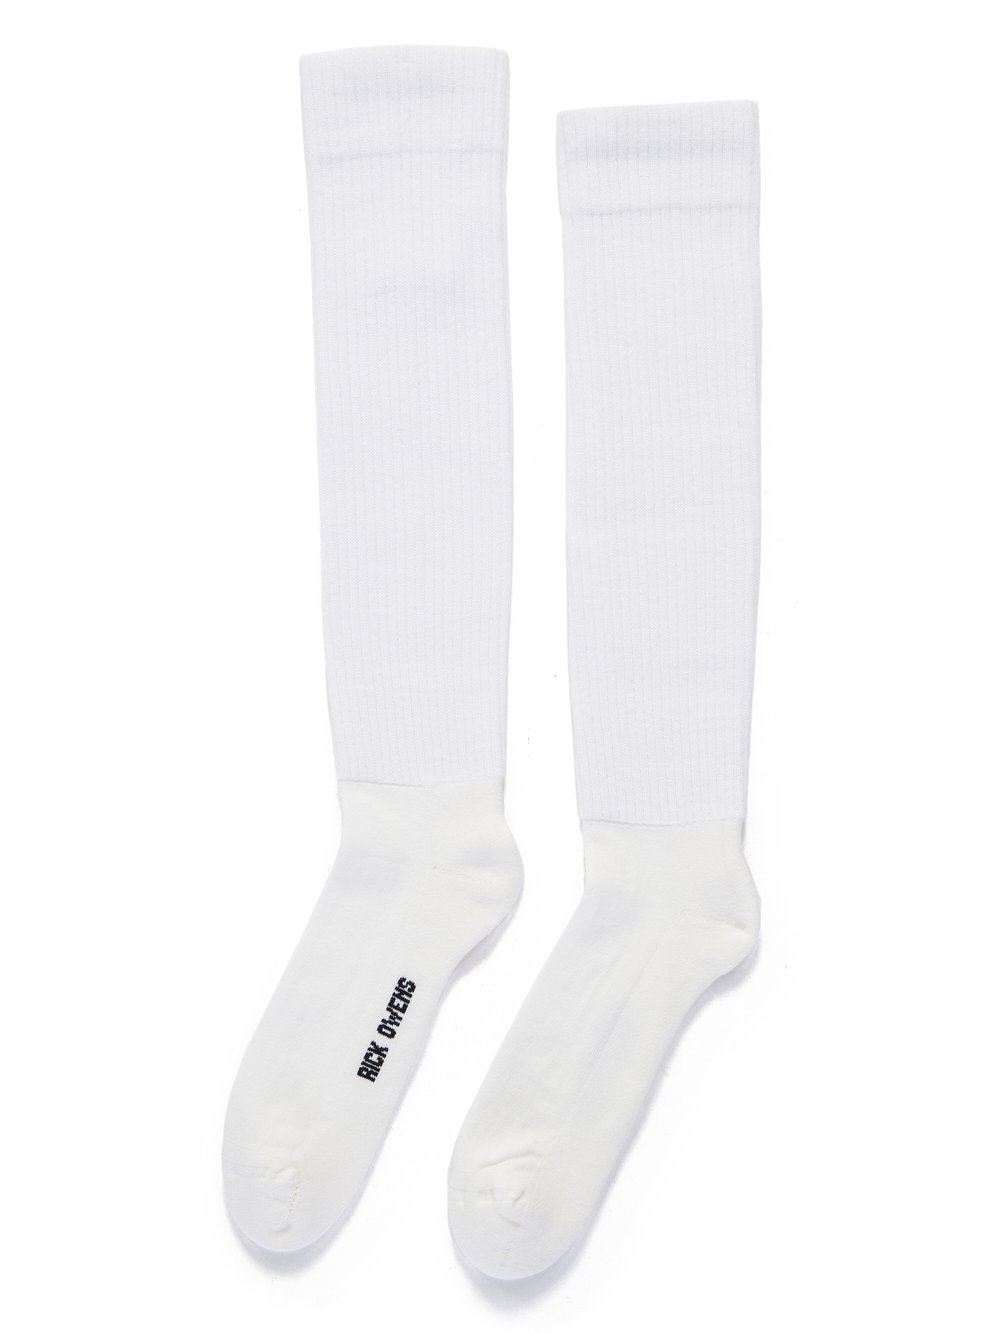 RICK OWENS FW23 LUXOR KNEE HIGH SOCKS IN MILK AND BLACK COTTON KNIT